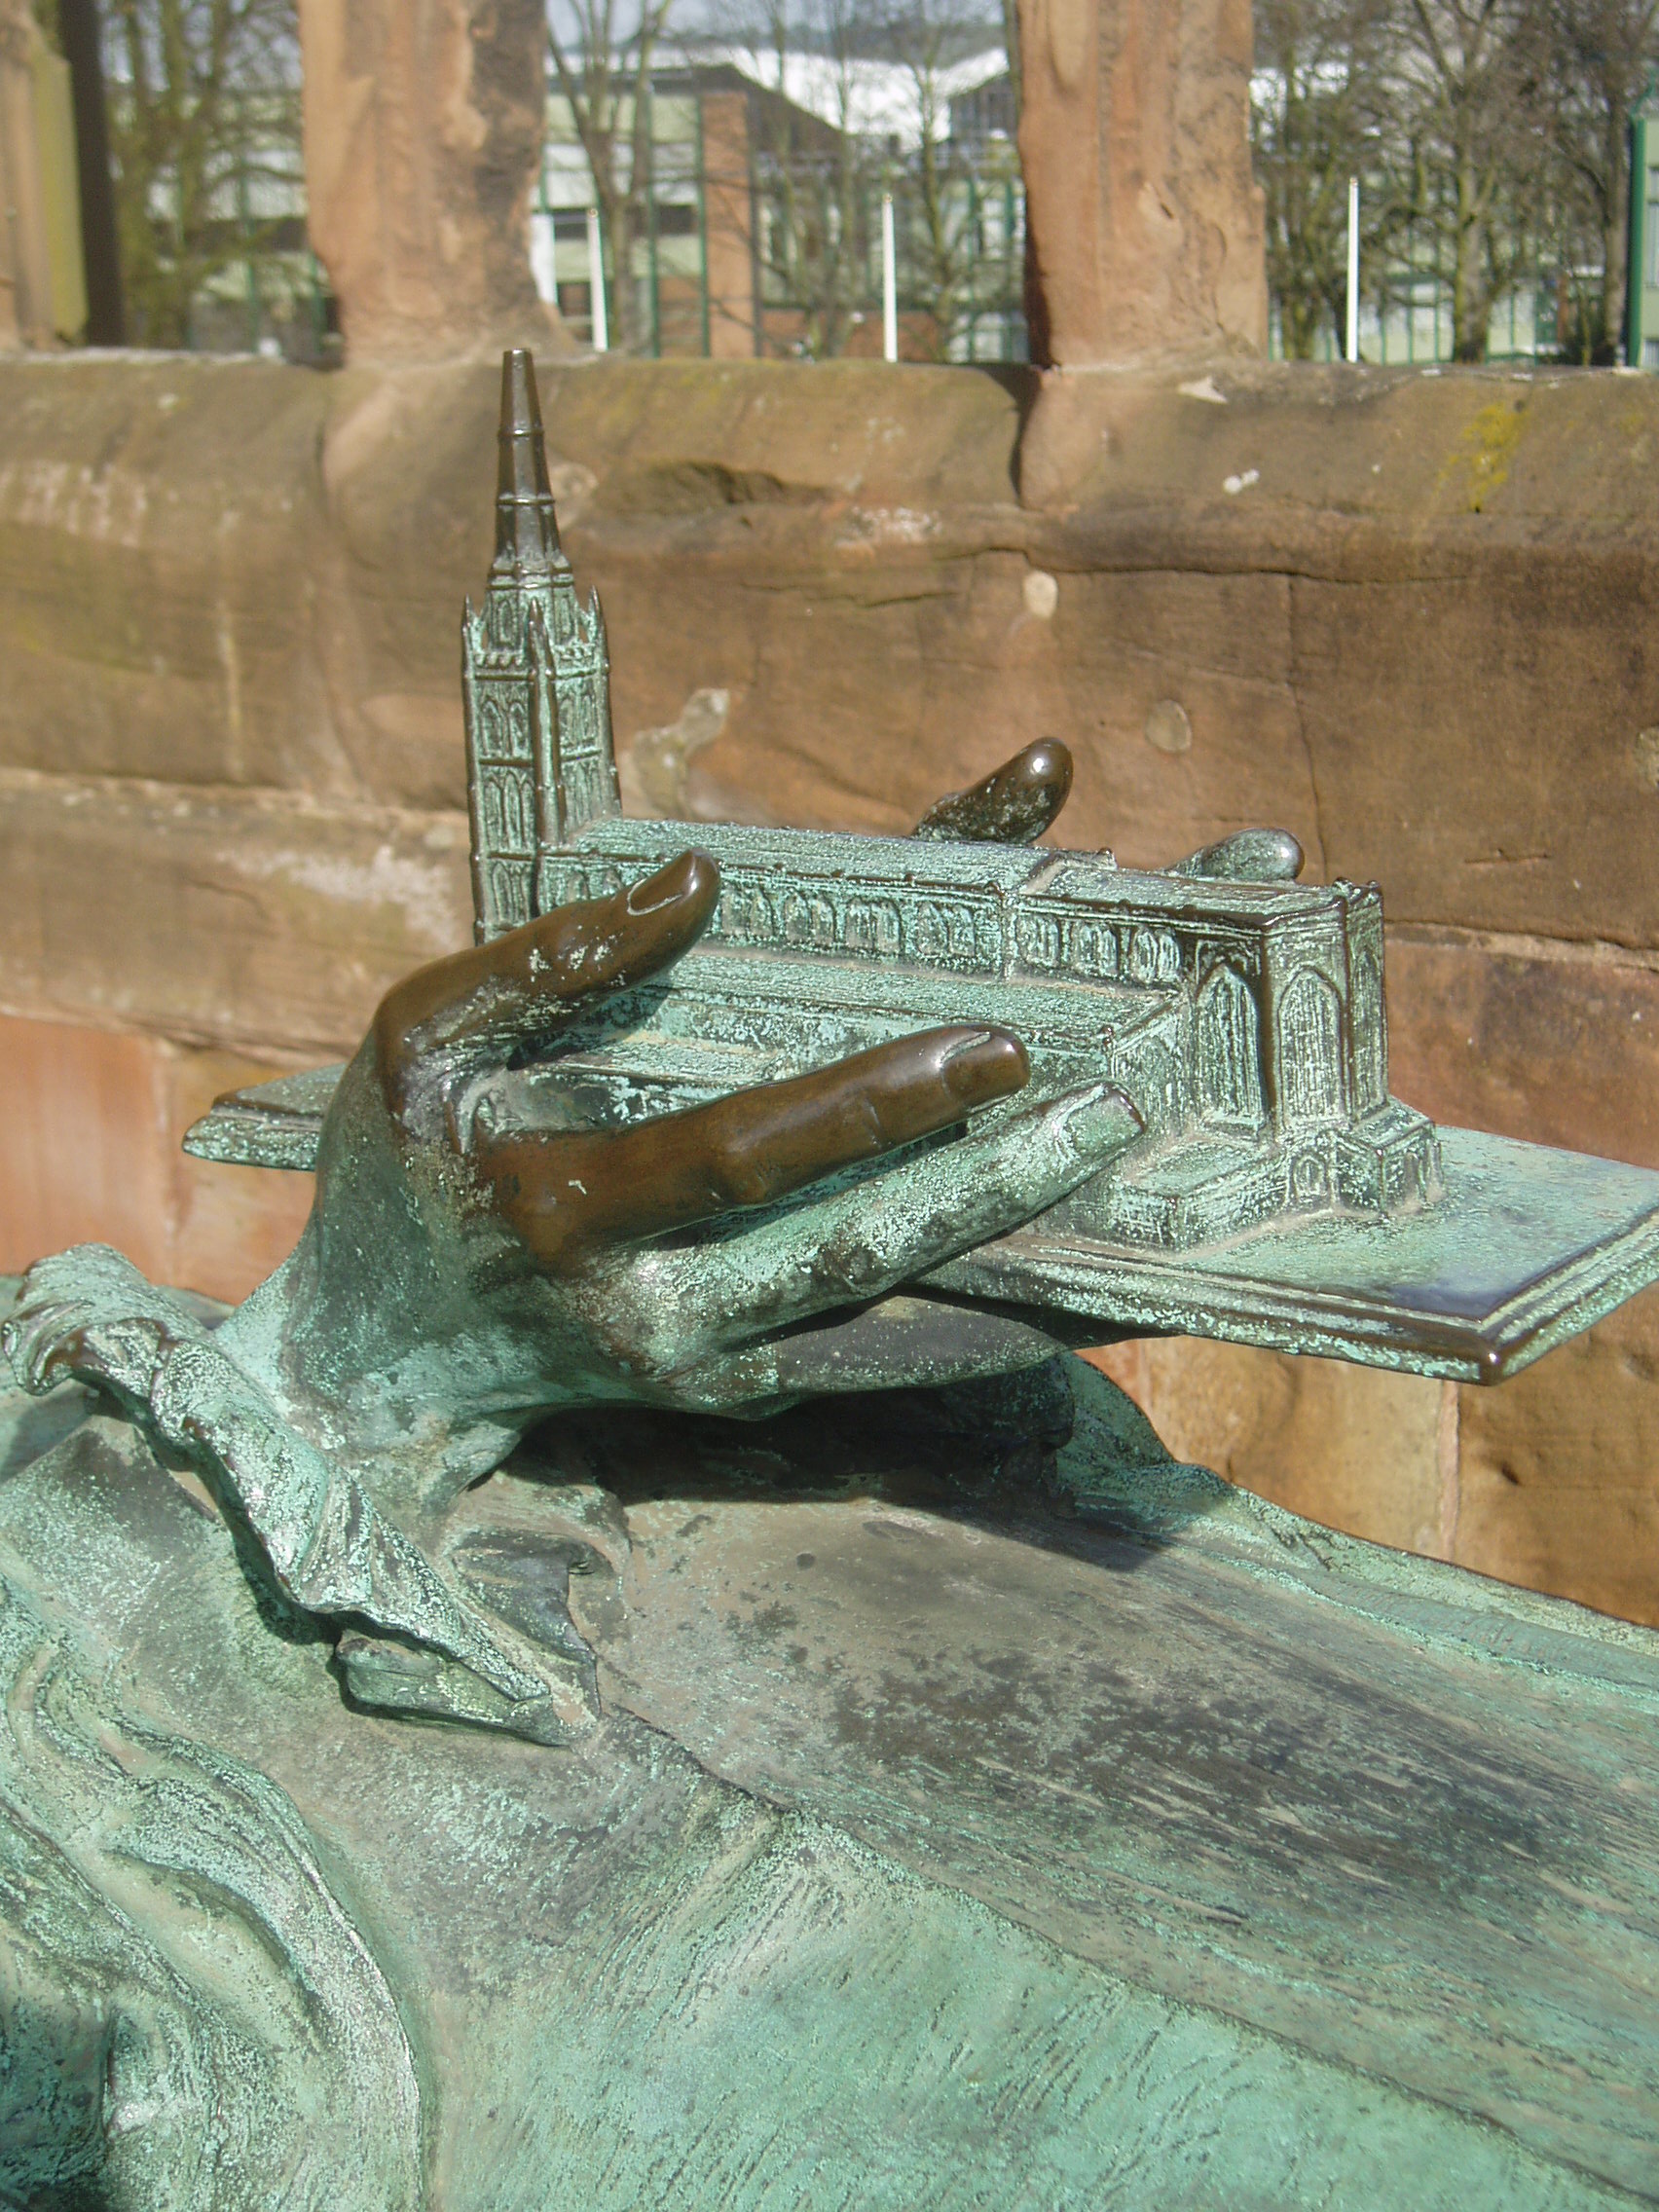 Old Coventry Cathedral in Miniature Detail of the memorial of Bishop Yeatman Biggs, first bishop of te newly refounded Diocese of Coventry (d.1922). The bronze effigy by Sir John Hamo Thornycroft was the only one of the old St Michael's many monuments to survive the bombing more or less intact. (It remains unclear what fragments survived in the debris of the important Tudor Nethermyll and Swillington tombs or what was done with them; old photos suggest something of the latter survived but no trace remains today). Coventry's Cathedral is a unique synthesis of old a new, born of wartime suffering and forged in the spirit of postwar optimism, famous for it's history and for being the most radically modern of Anglican cathedrals. Two cathedral's stand side by side, the ruins of the medieval building, destroyed by incendiary bombs in 1940 and the bold new building designed by Basil Spence and opened in 1962. It is a common misconception that Coventry lost it's first cathedral in the wartime blitz, but the bombs actually destroyed it's second; the original medieval cathedral was the monastic St Mary's, a large cruciform building believed to have been similar in appearance to Lichfield Cathedral (whose diocese it shared). Tragically it became the only English cathedral to be destroyed during the Reformation, after which it was quickly quarried away, leaving only scant fragments, but enough evidence survives to indicate it's rich decoration (some pieces displayed nearby in the Priory Visitors Centre). Foundations of it's apse were found during the building of the new cathedral in the 1950s, thus technically three cathedrals share the same site. The mainly 15th century St Michael's parish church became the seat of the new diocese of Coventry in 1918, and being one of the largest parish churches in the country it was upgraded to cathedral status without structural changes (unlike most 'parish church' cathedrals created in the early 20th century). It lasted in this role a mere 22 years before being burned to the ground in the 1940 Coventry Blitz, leaving only the outer walls and the magnificent tapering tower and spire (the extensive arcades and clerestoreys collapsed completely in the fire, precipitated by the roof reinforcement girders, installed in the Victorian restoration, that buckled in the intense heat). The determination to rebuild the cathedral in some form was born on the day of the bombing, however it wasn't until the mid 1950s that a competition was held and Sir Basil Spence's design was chosen. Spence had been so moved by experiencing the ruined church he resolved to retain it entirely to serve as a forecourt to the new church. He envisaged the two being linked by a glass screen wall so that the old church would be visible from within the new. Built between 1957-62 at a right-angle to the ruins, the new cathedral attracted controversy for it's modern form, and yet some modernists argued that it didn't go far enough, afterall there are echoes of the gothic style in the great stone-mullioned windows of the nave and the net vaulting (actually a free-standing canopy) within. What is exceptional is the way art has been used as such an integral part of the building, a watershed moment, revolutionising the concept of religious art in Britain. Spence employed some of the biggest names in contemporary art to contribute their vision to his; the exterior is adorned with Jacob Epstein's triumphant bronze figures of Archangel Michael (patron of the cathedral) vanquishing the Devil. At the entrance is the remarkable glass wall, engraved by John Hutton with strikingly stylised figures of saints and angels, and allowing the interior of the new to communicate with the ruin. Inside, the great tapestry of Christ in majesty surrounded by the evangelistic creatures, draws the eye beyond the high altar; it was designed by Graham Sutherland and was the largest tapestry ever made. However one of the greatest features of Coventry is it's wealth of modern stained glass, something Spence resolved to include having witnessed the bleakness of Chartres Cathedral in wartime, when all it's stained glass had been removed. The first window encountered on entering is the enormous 'chess-board' baptistry window filled with stunning abstract glass by John Piper & Patrick Reyntiens, a symphony of glowing colour. The staggered nave walls are illuminated by ten narrow floor to ceiling windows filled with semi-abstract symbolic designs arranged in pairs of dominant colours (green, red, multi-coloured, purple/blue and gold) representing the souls journey to maturity, and revealed gradually as one approaches the altar. This amazing project was the work of three designers lead by master glass artist Lawrence